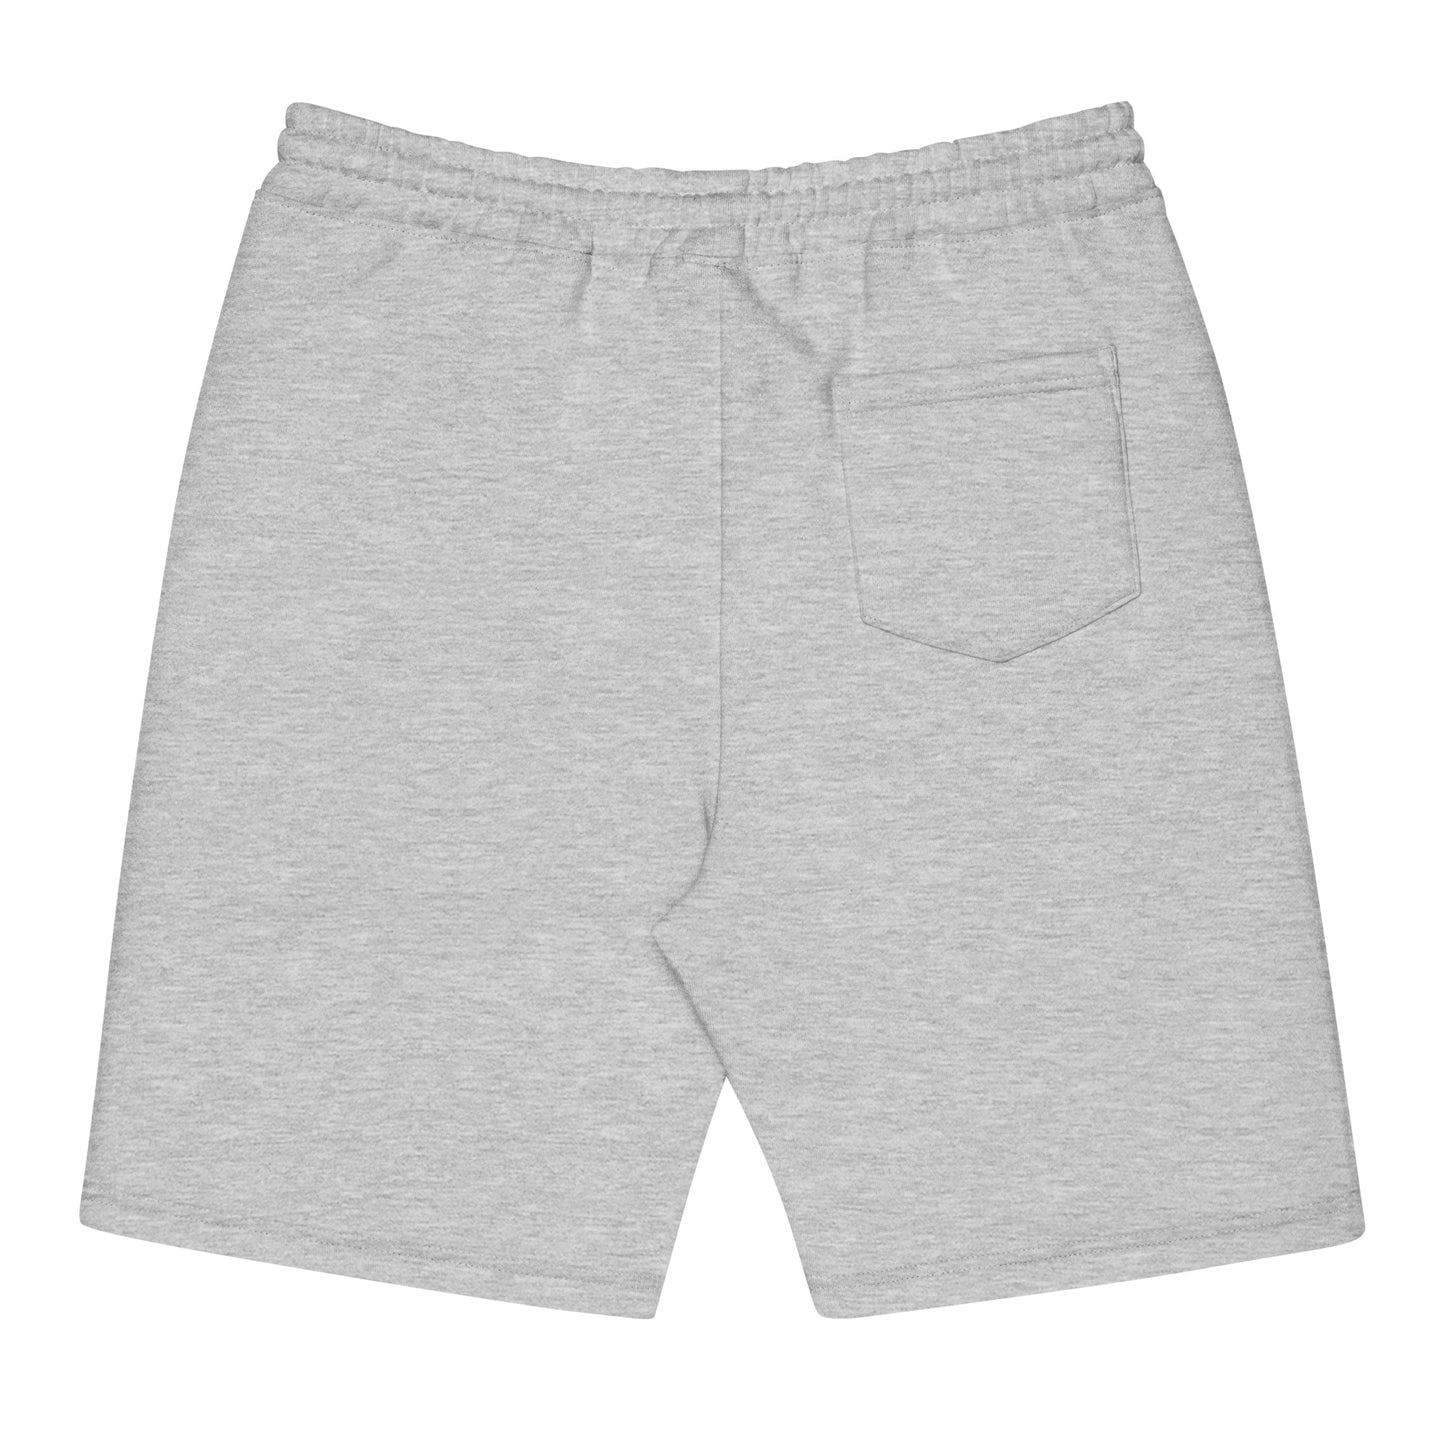 They/ Them fleece shorts - Rose Gold Co. Shop